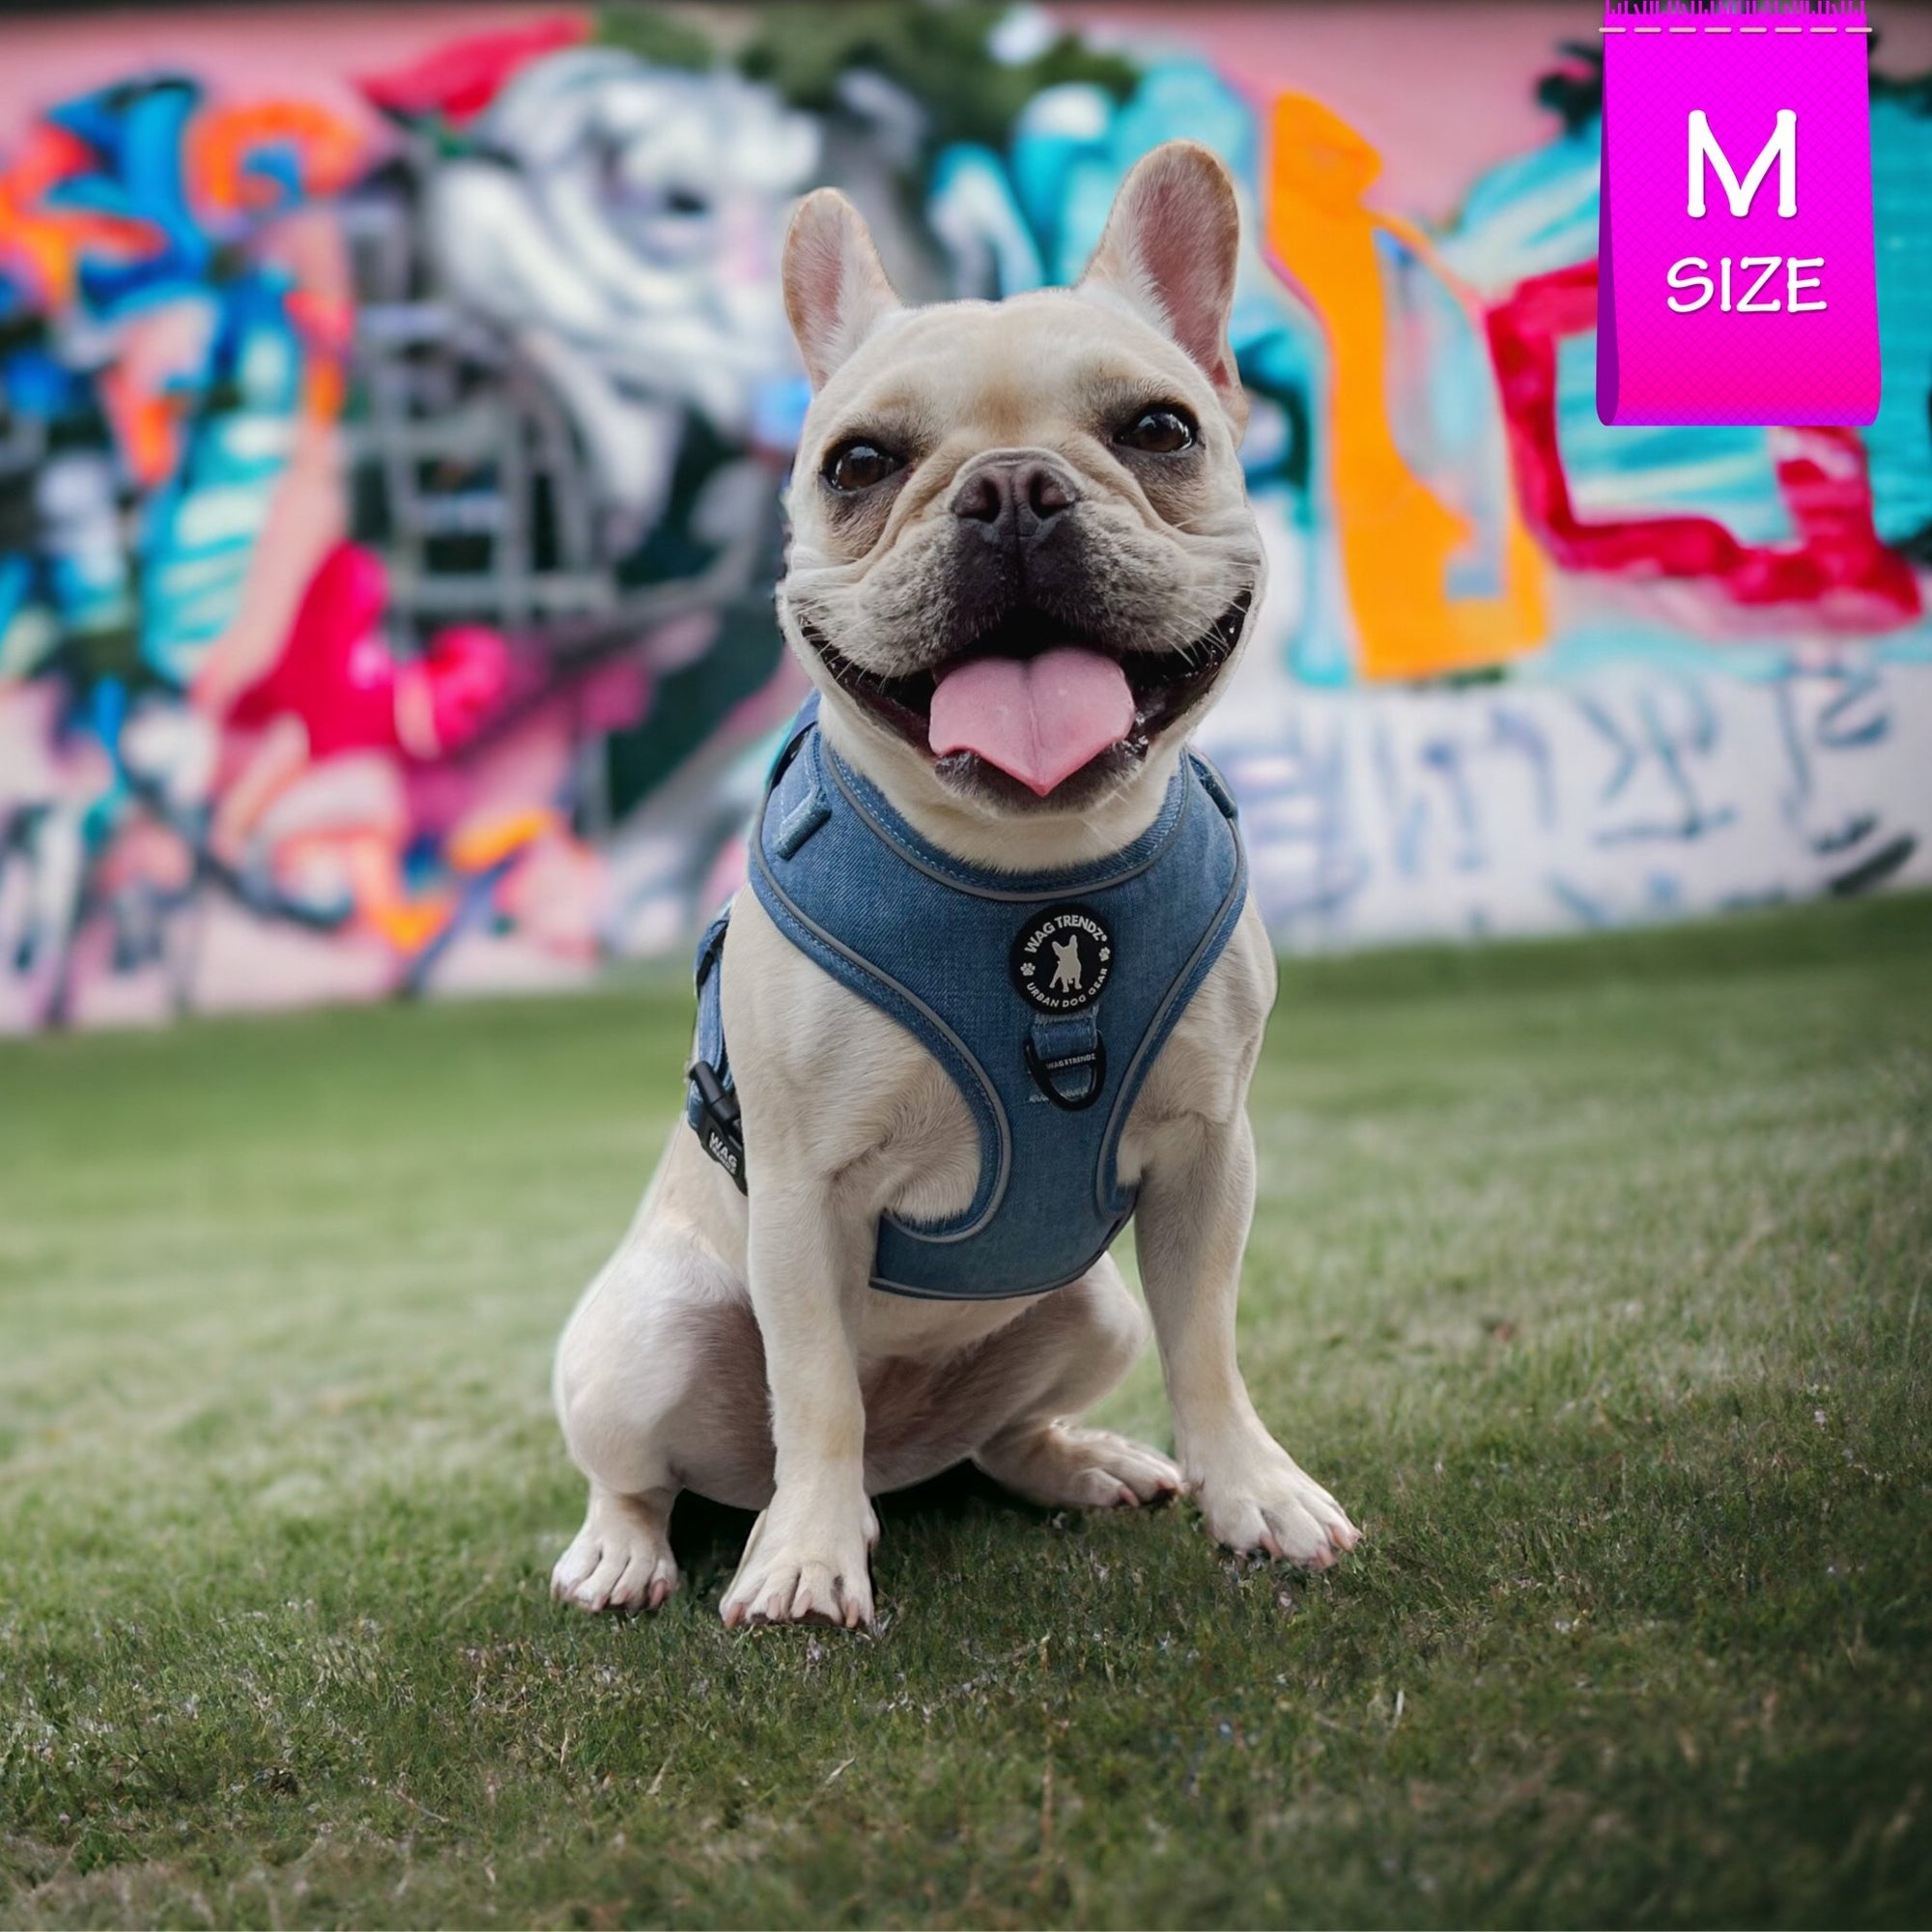 Dog Harness and Leash - French Bulldog wearing Downtown Denim Dog Harness with reflective accents - sitting on green grass with a bright painted wall in background - Wag Trendz